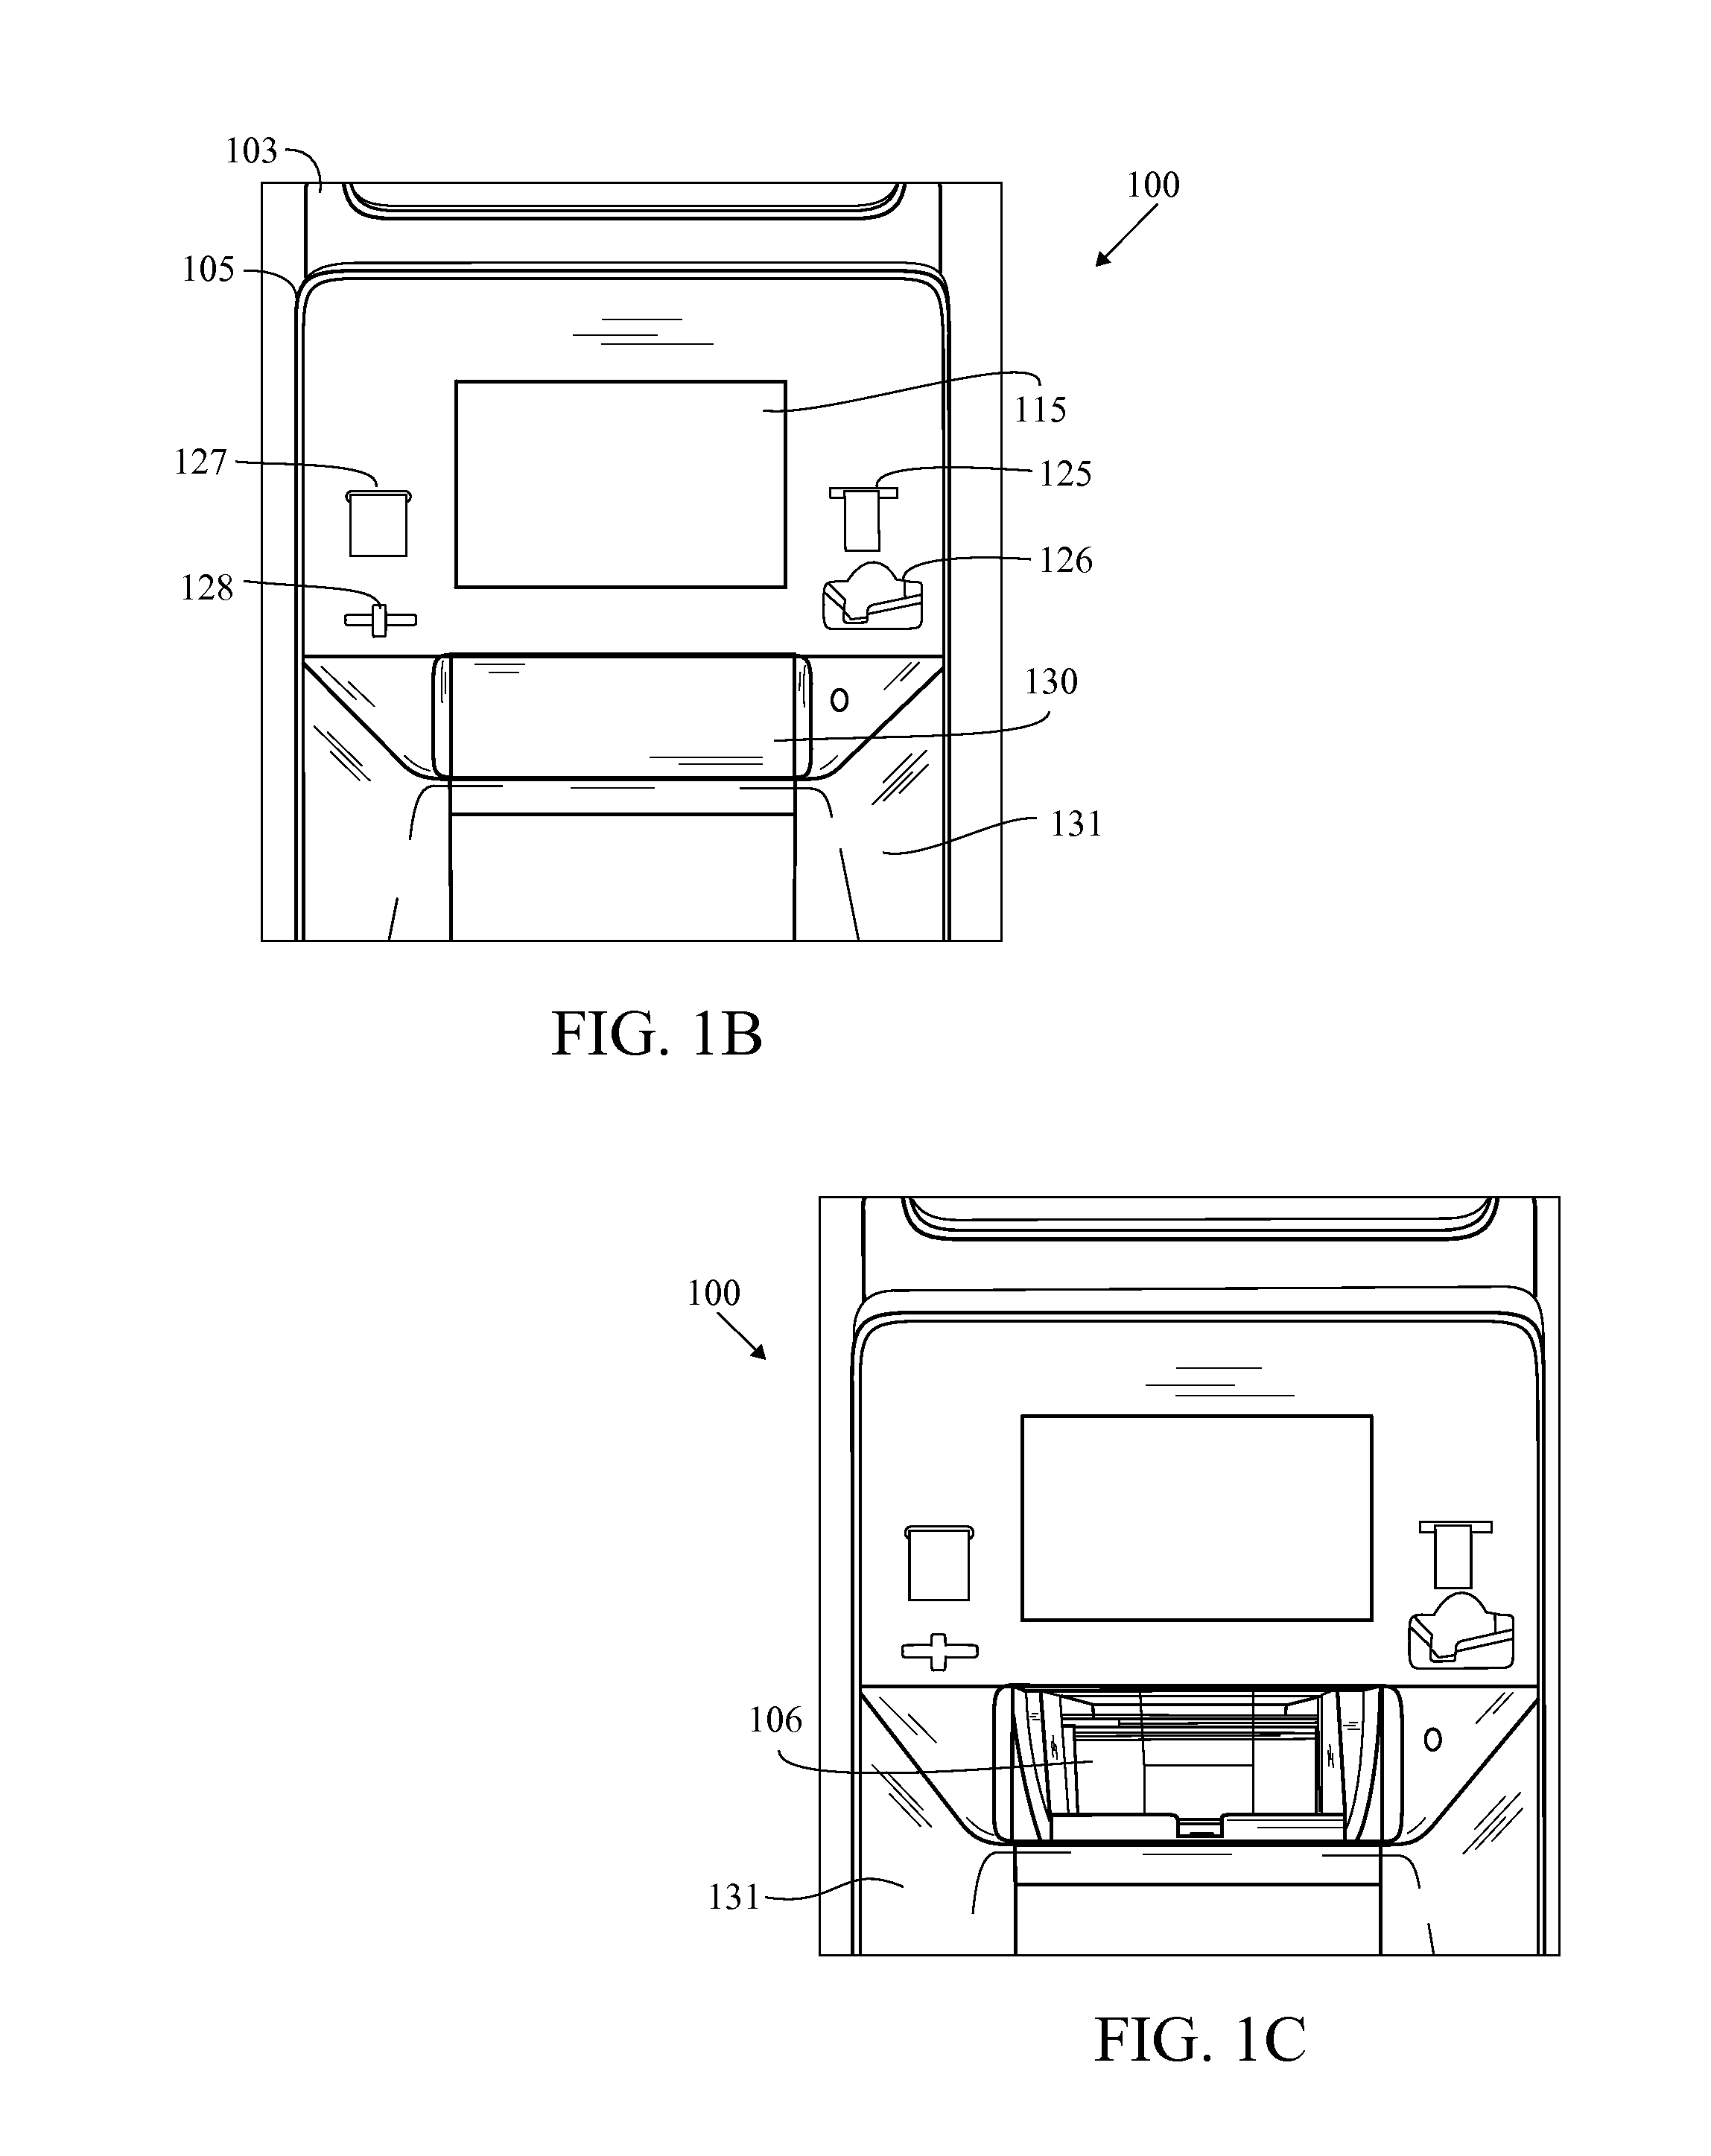 Method And Apparatus For Recycling Electronic Devices